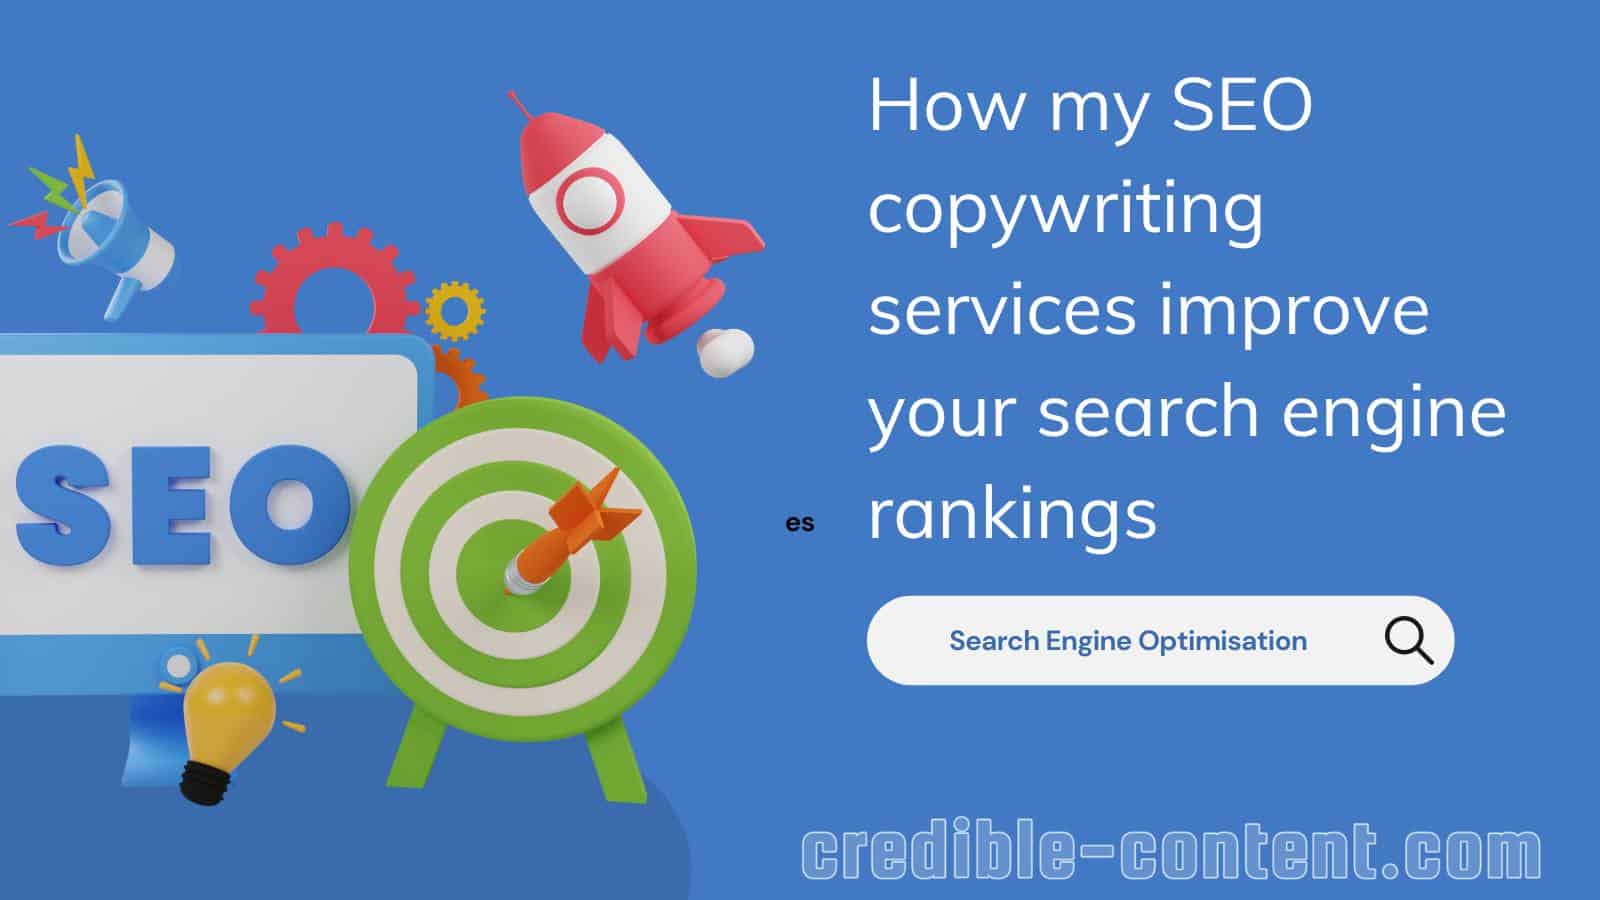 How my SEO copywriting services improve your search engine rankings